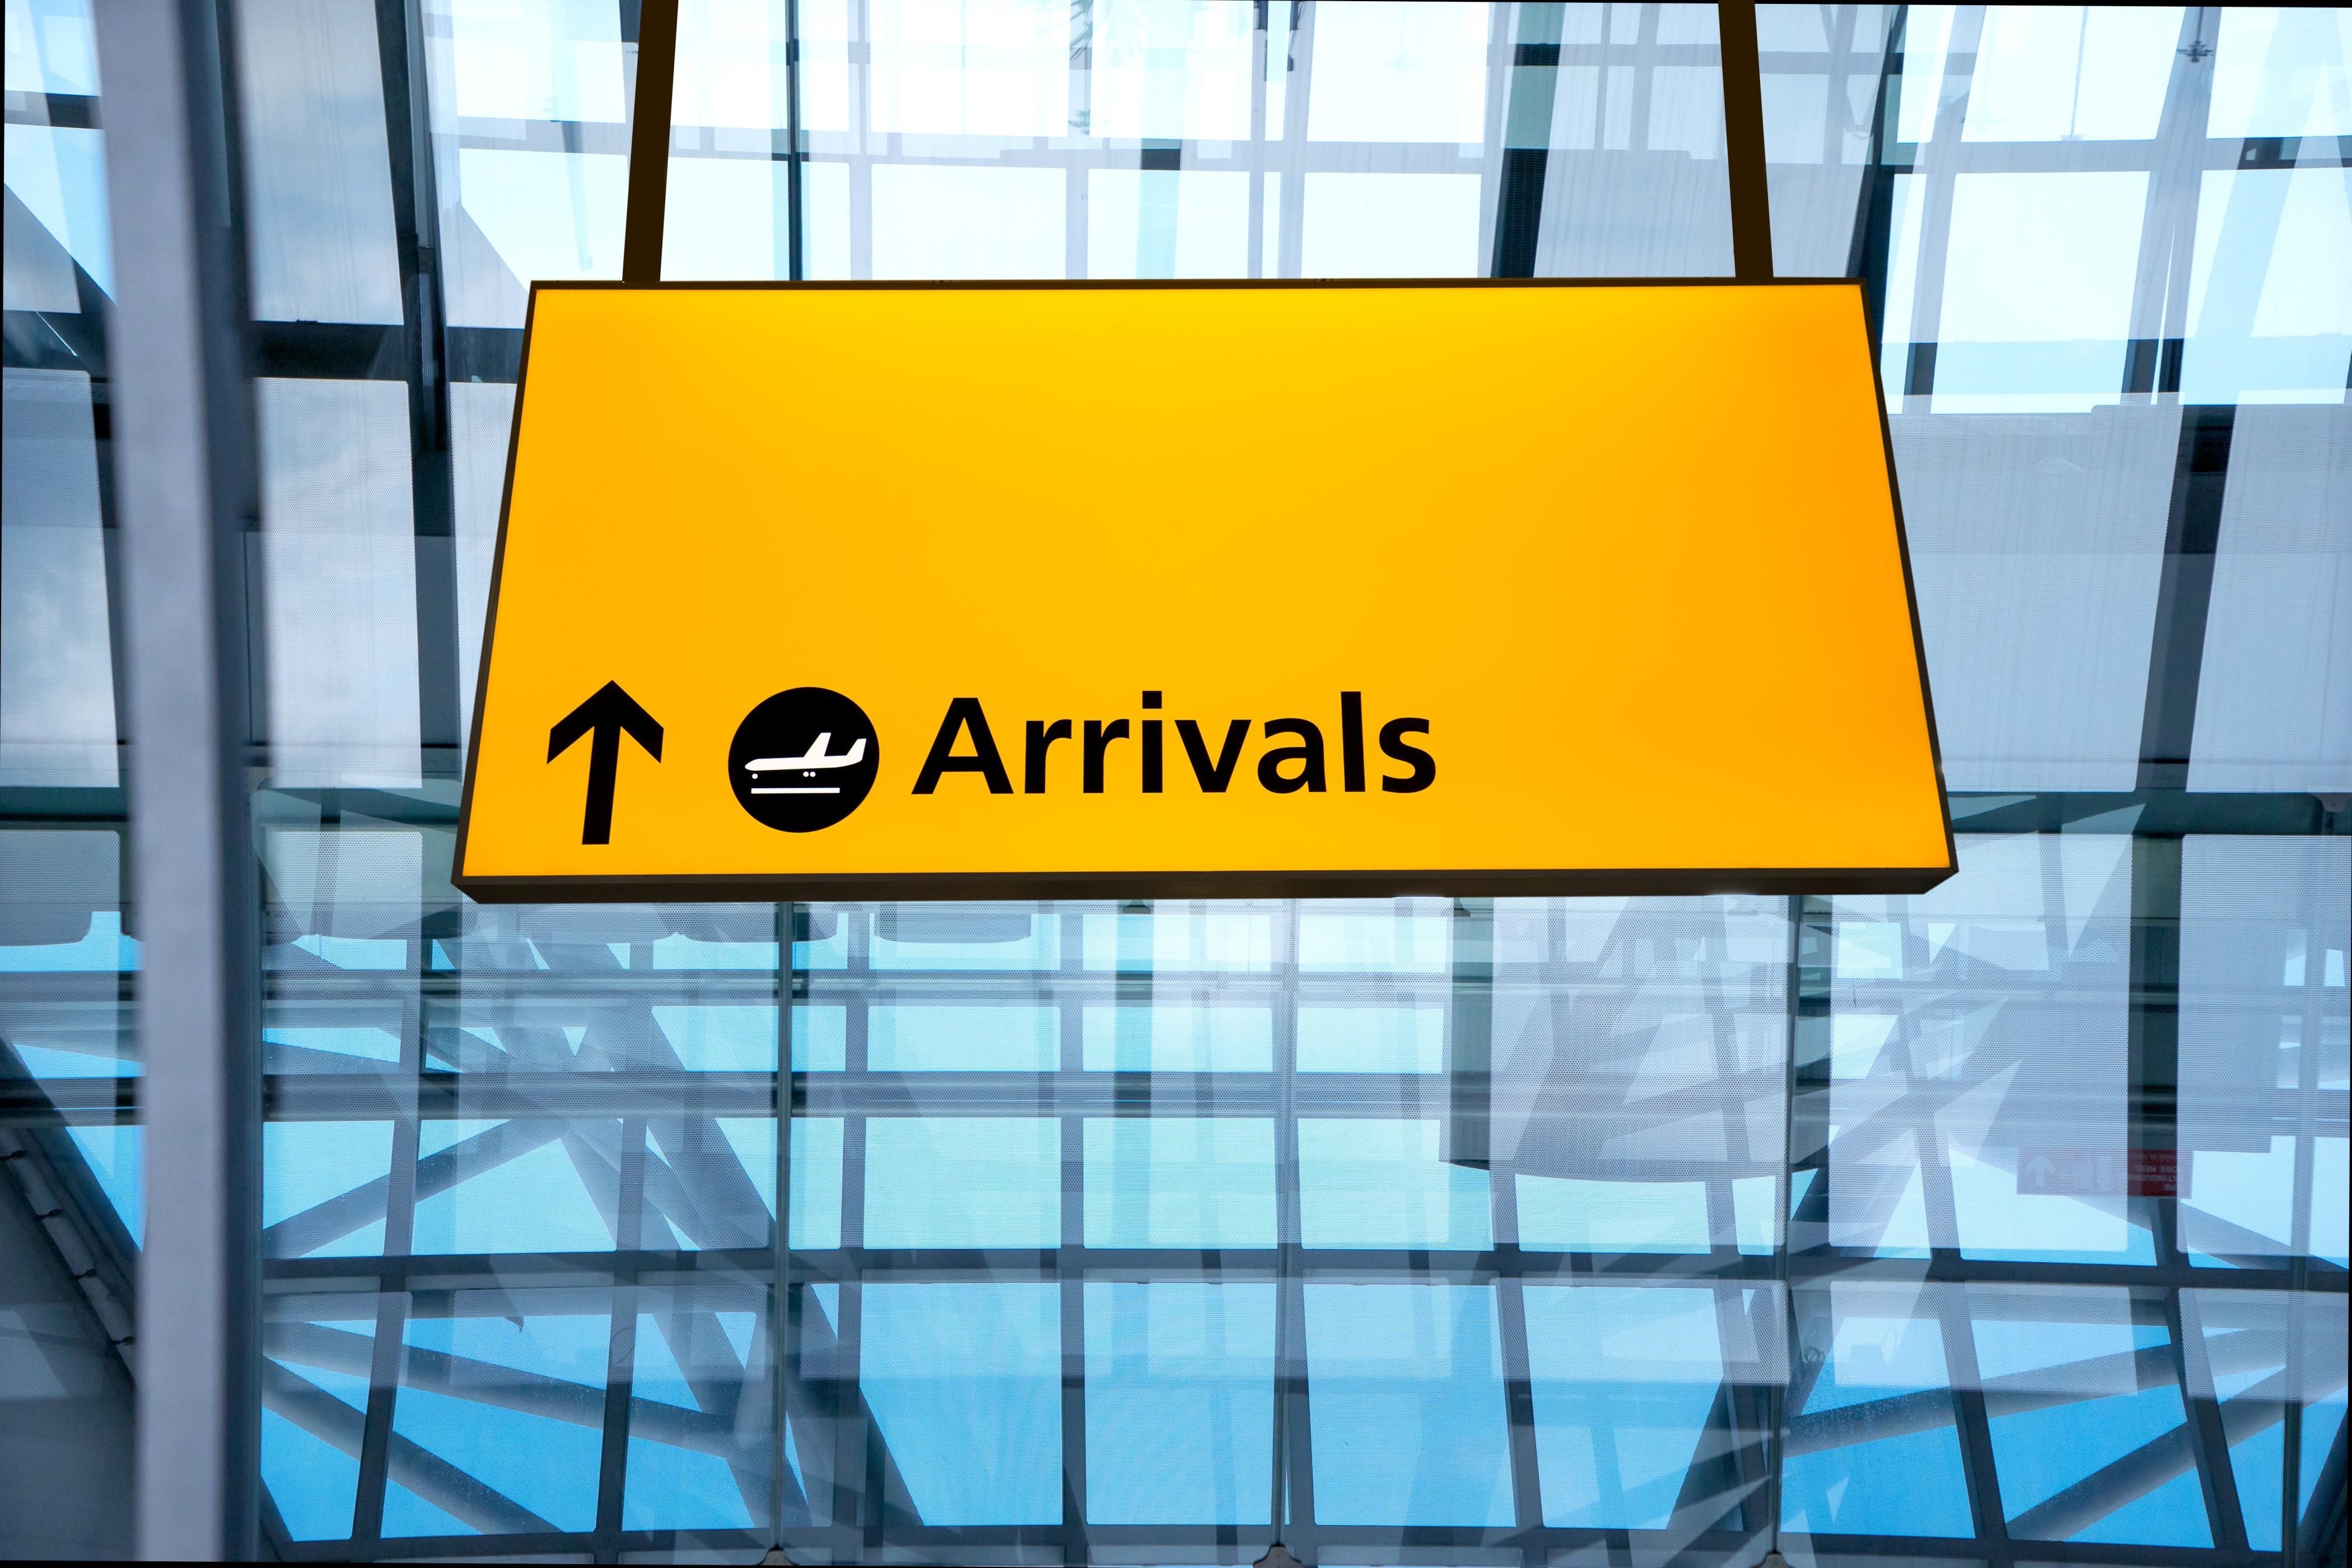 check-airport-departure-arrival-information-sign (1).jpg